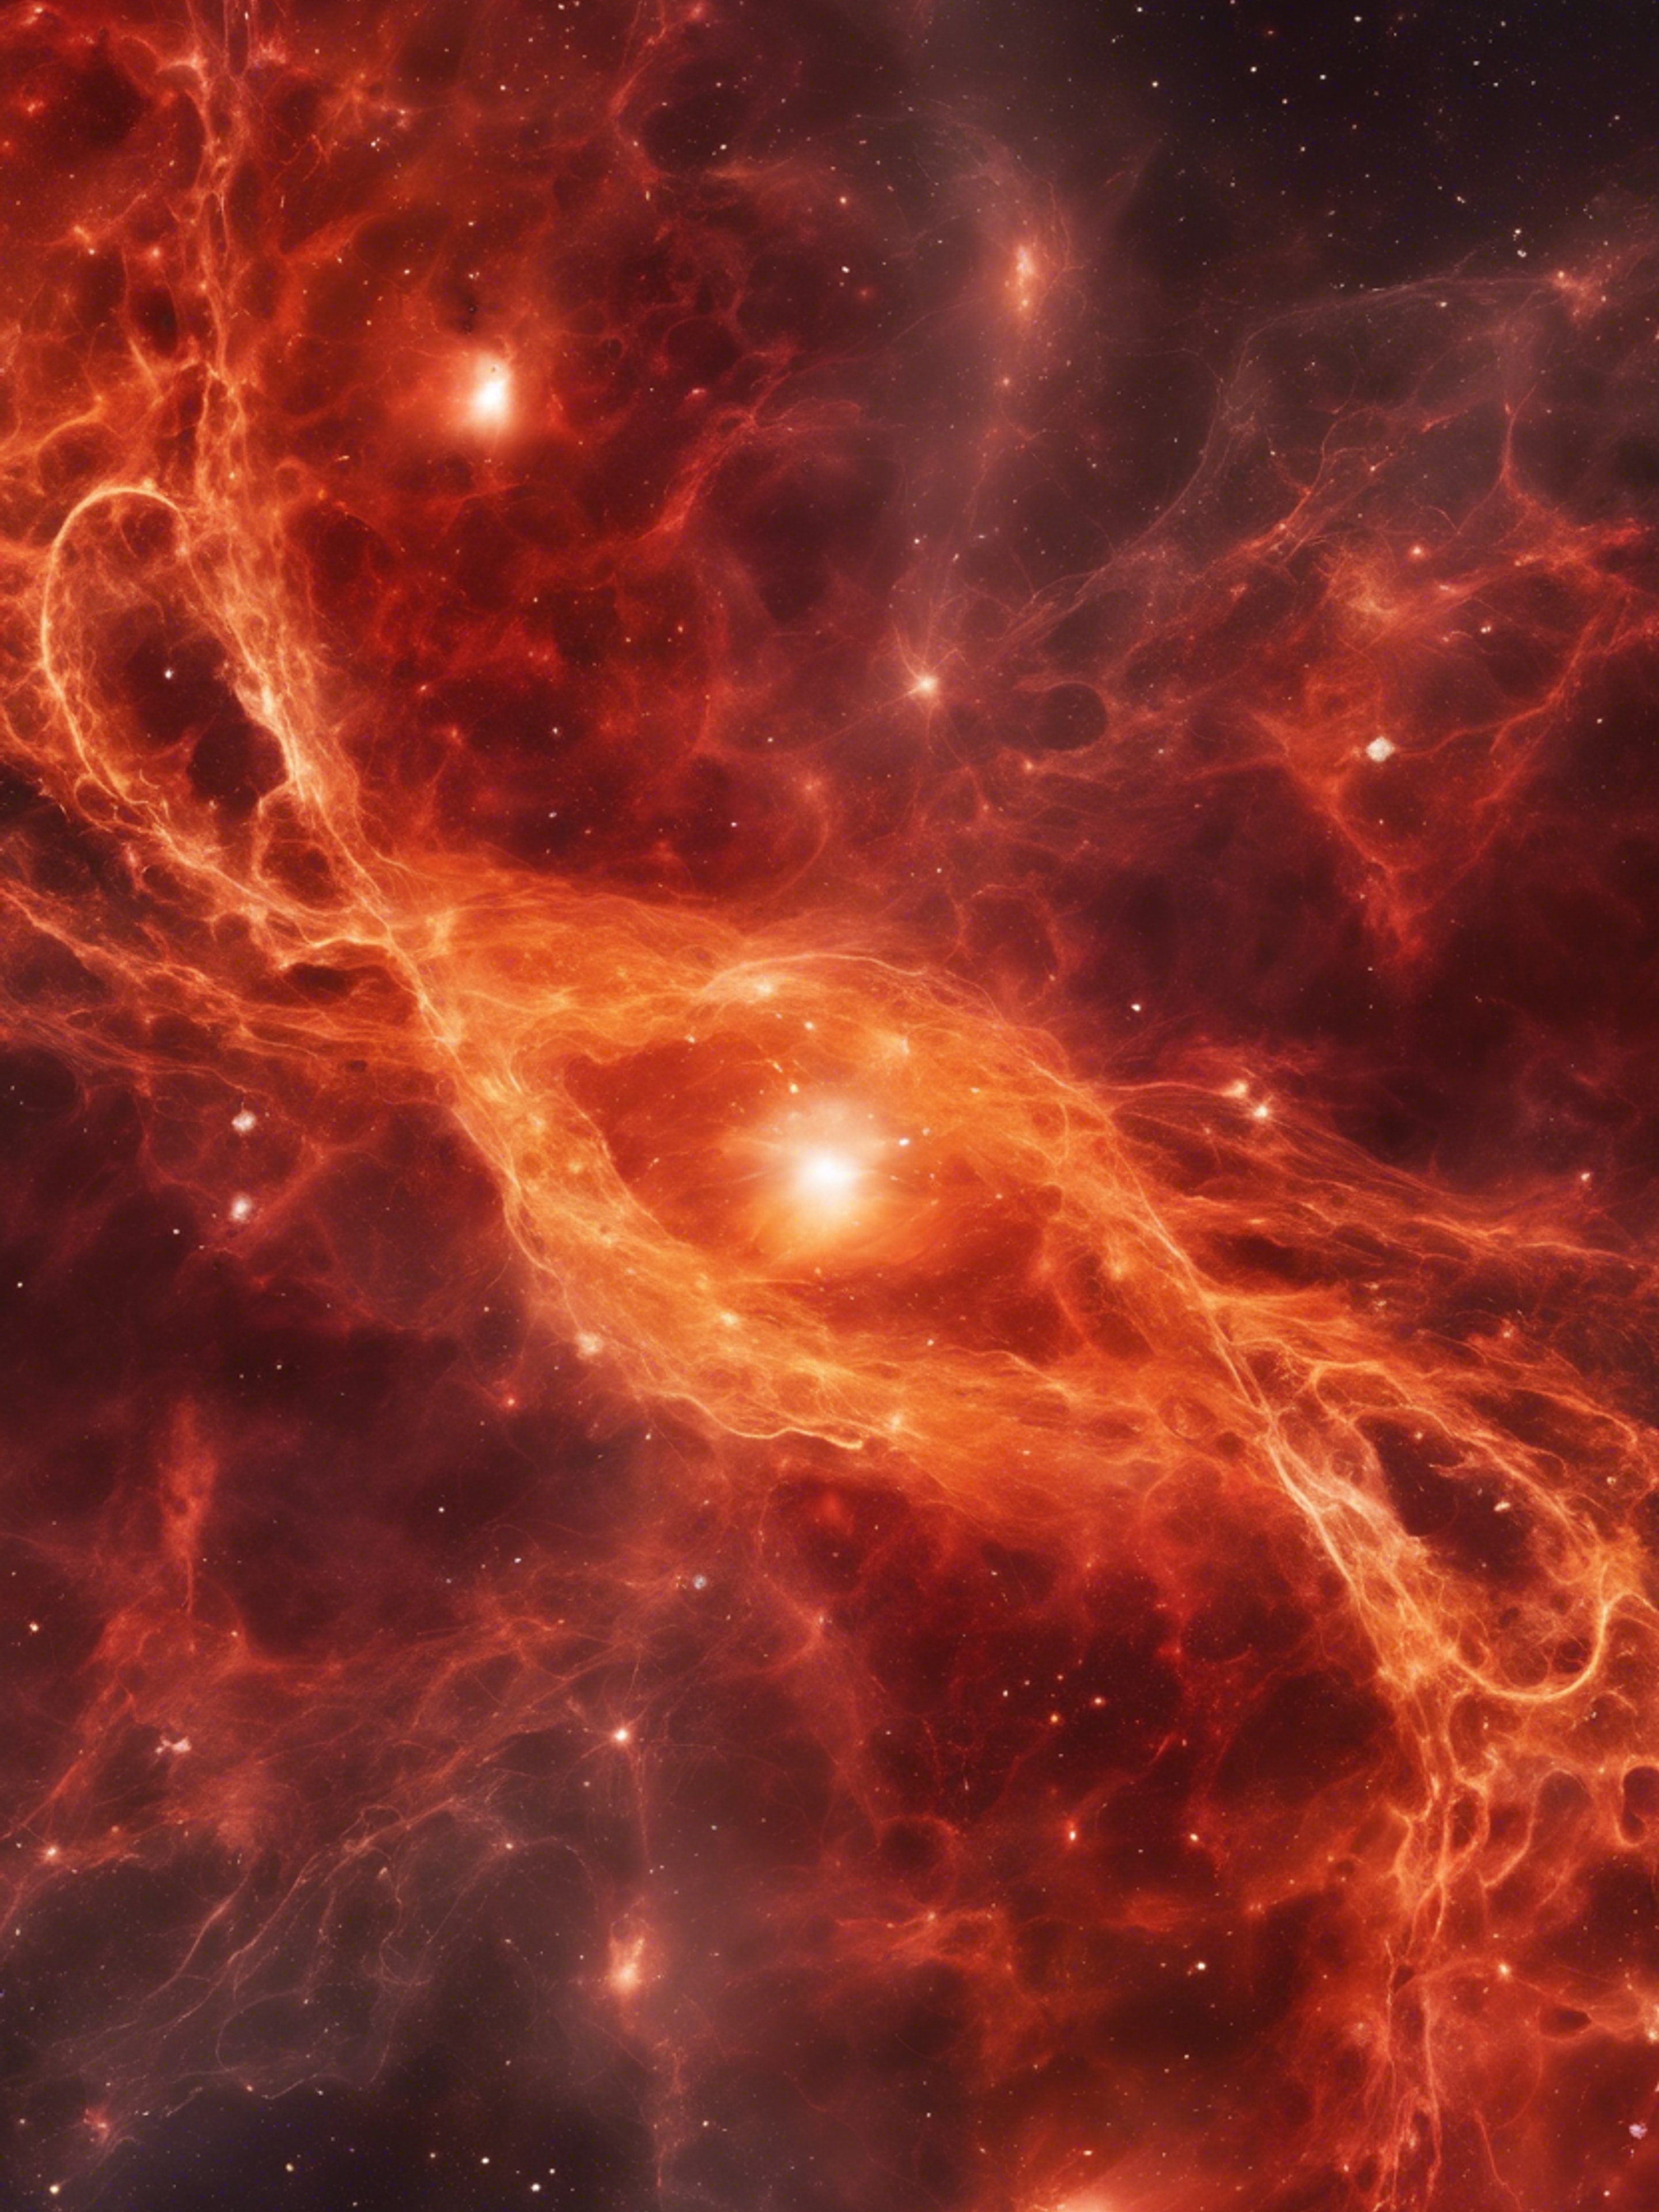 Red and orange nebula moving in chaos to form an alluring abstract pattern, lost in an endless loop. Tapet[8b81d5815a2d445c9bb4]